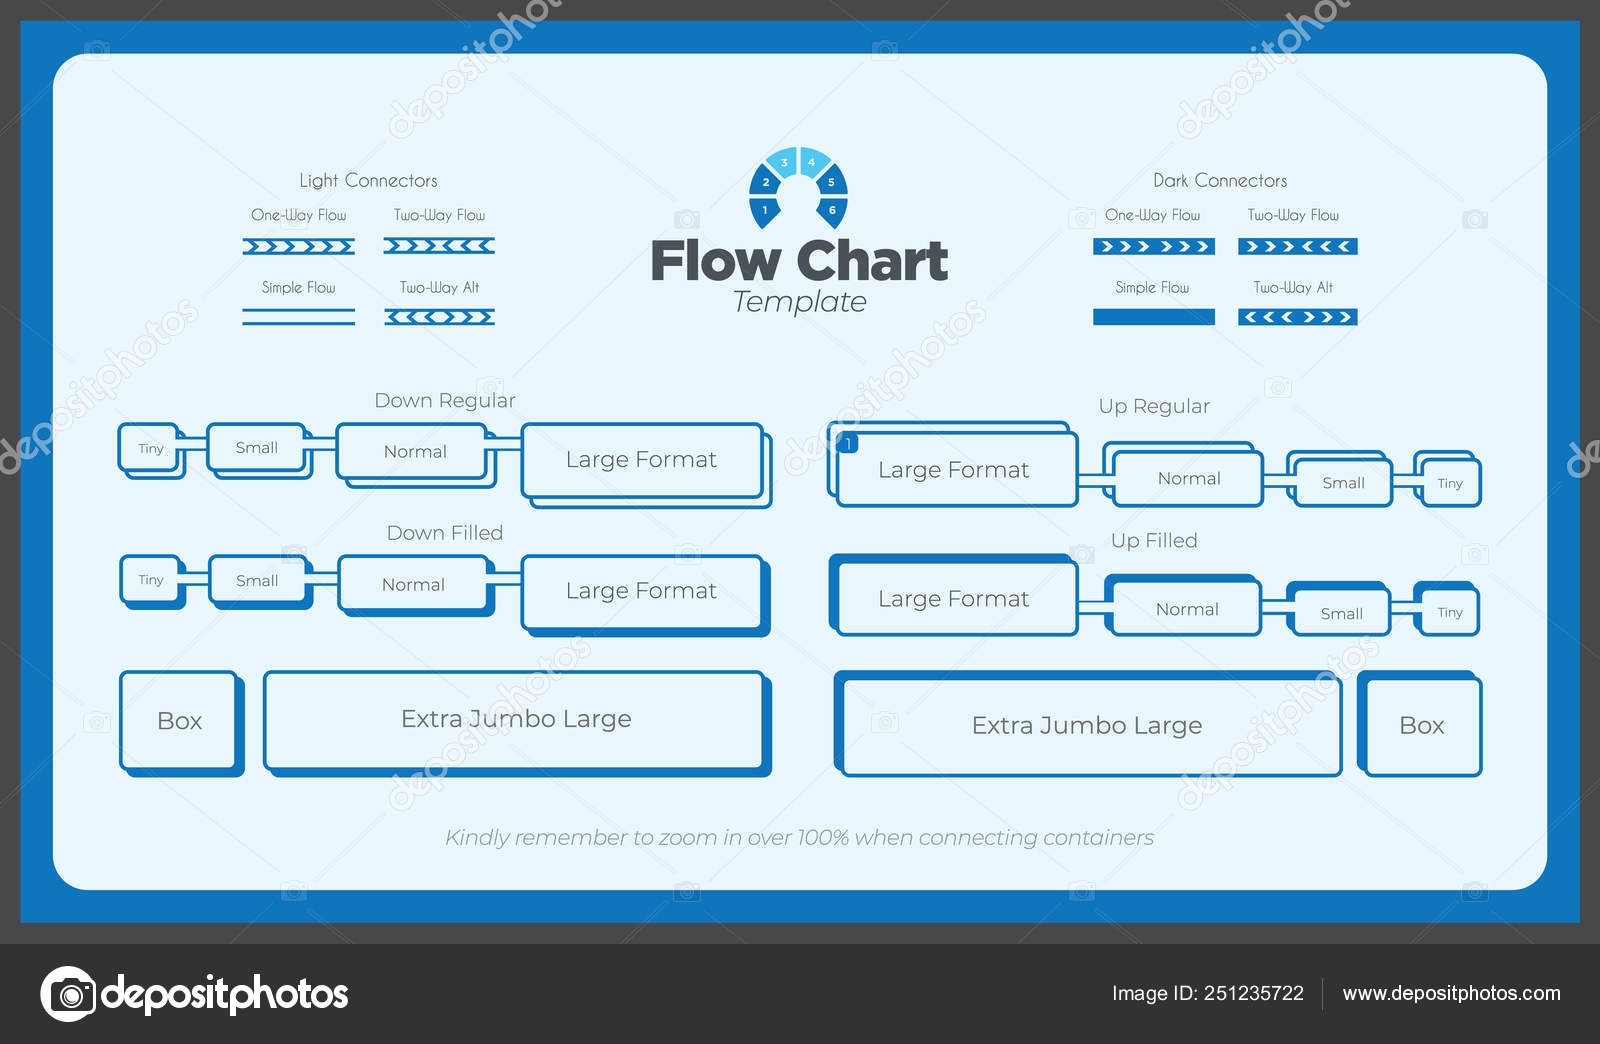 Create Your Own Flow Chart